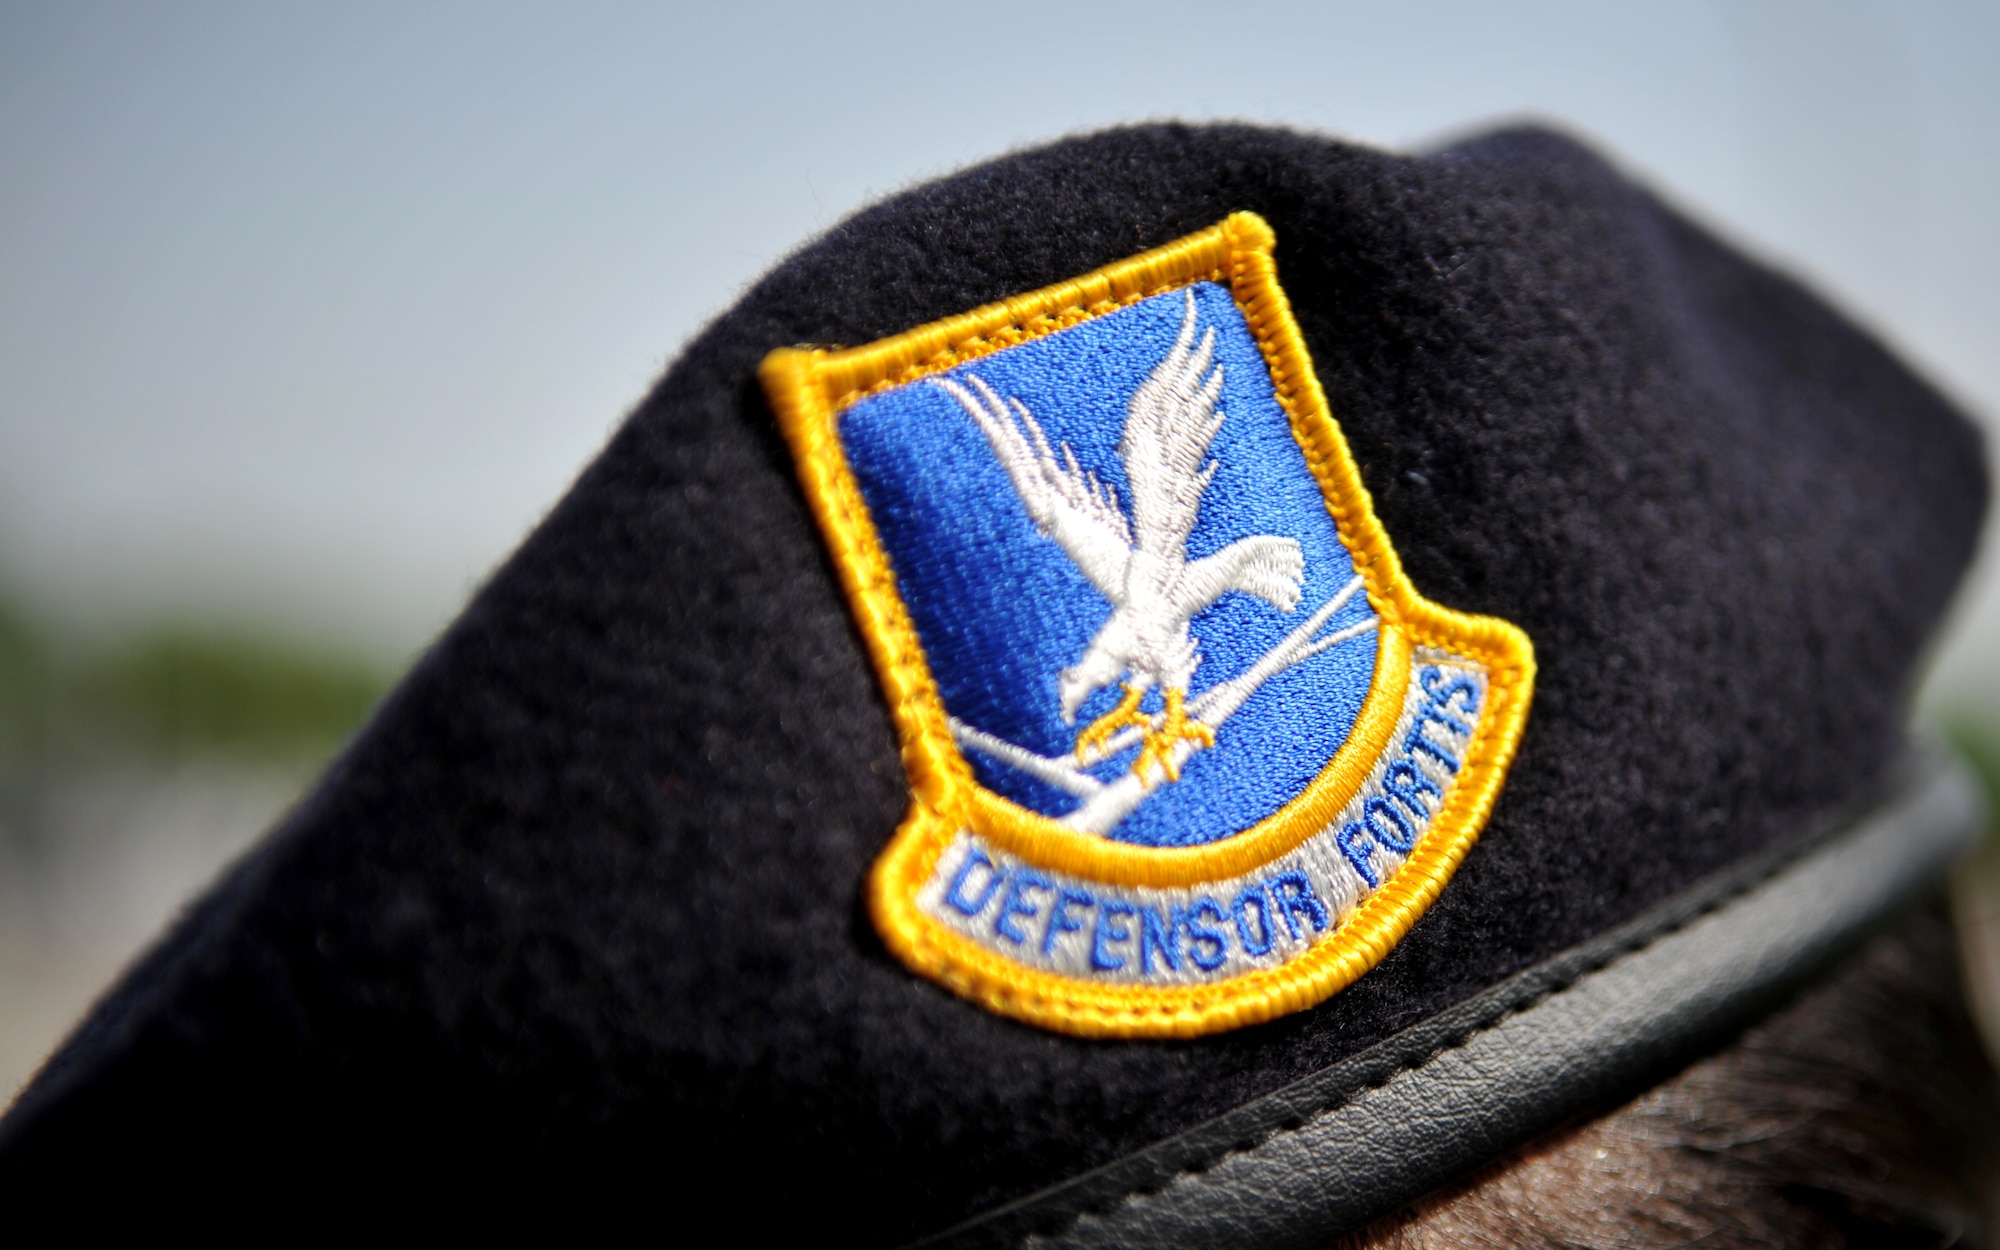 The “defensor fortis” flash stands out against the blue beret of Senior Master Sgt. Roelma Wood, 51st Security Forces Squadron, during the Police Week retreat ceremony at Osan Air Base, Republic of Korea, May 16, 2014. “Defensor fortis” is Latin for “defenders of the force.” (U.S. Air Force photo/Airman 1st Class Ashley J. Thum)